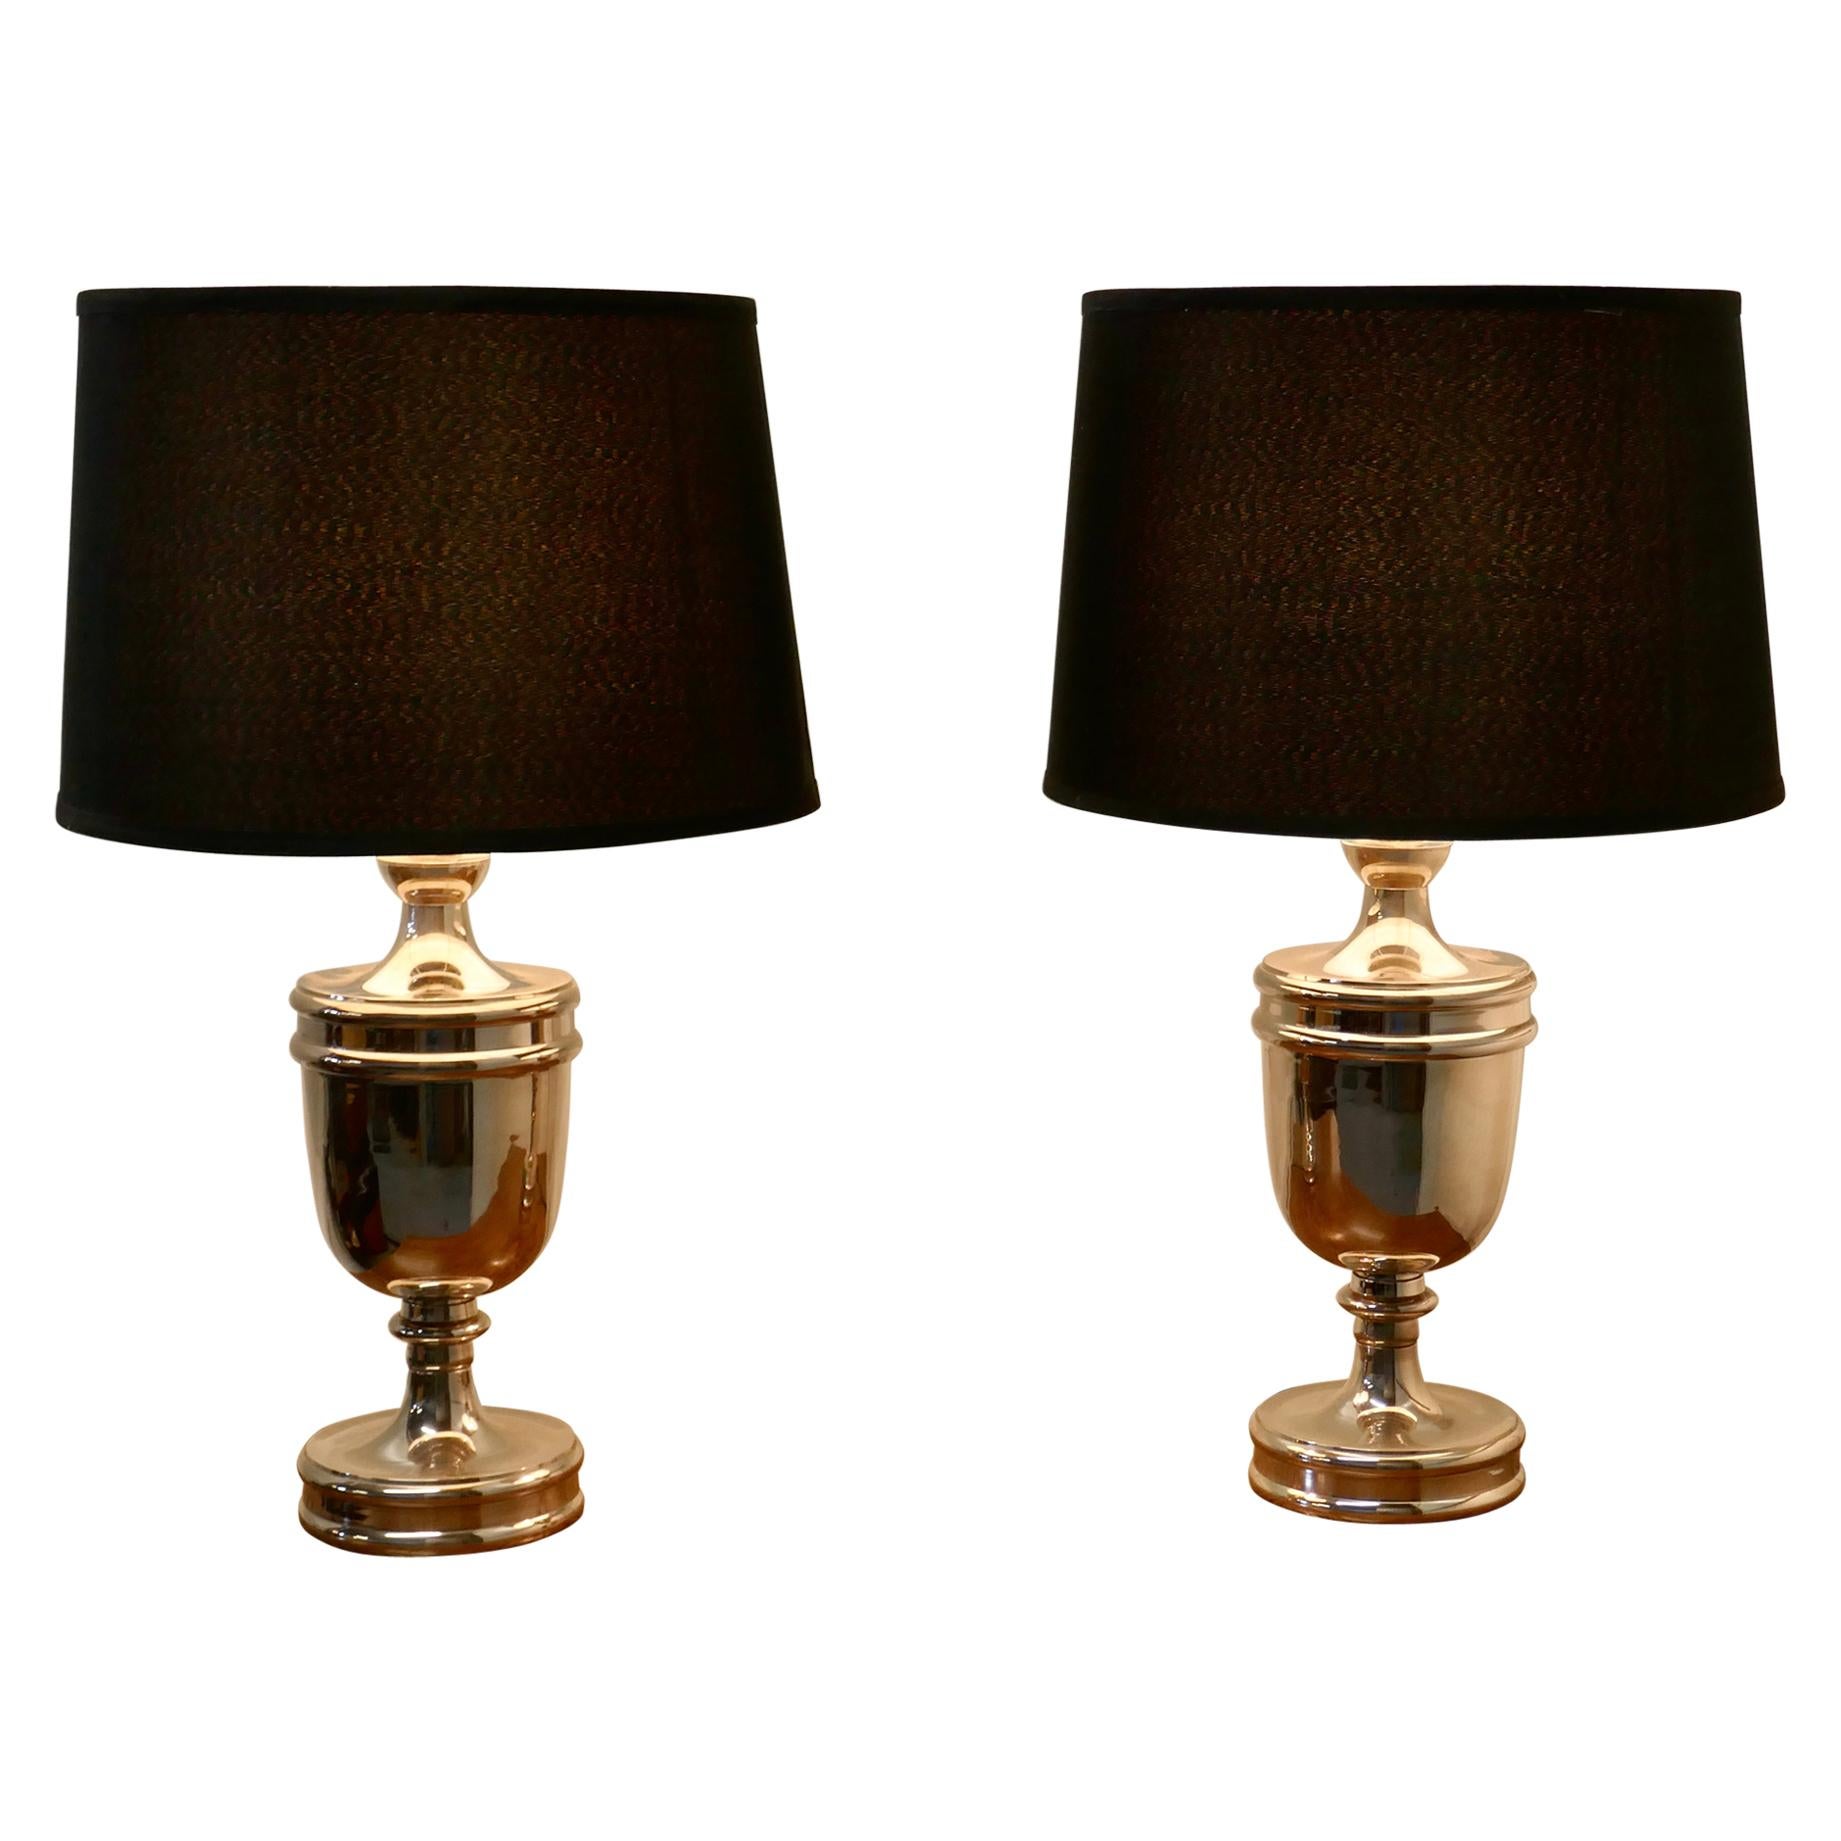 Pair of Large Art Deco Style Chrome Table Lamps with Black Shades